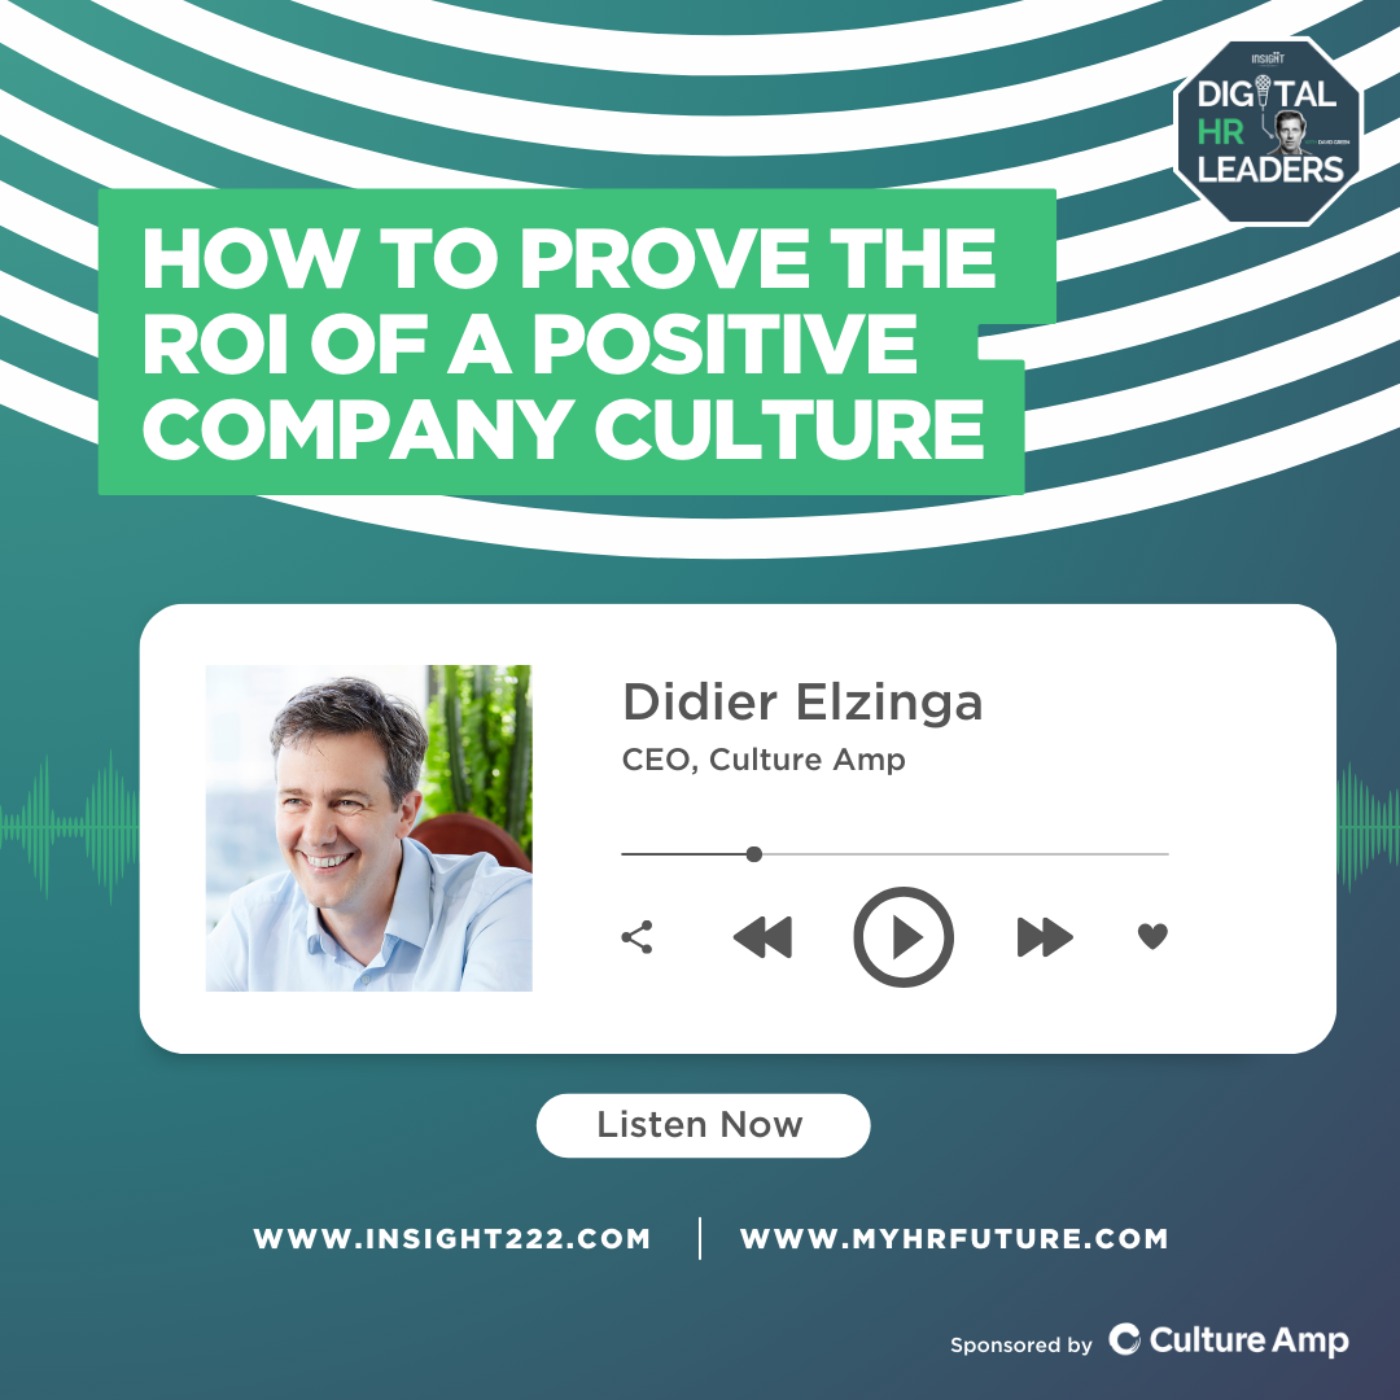 How to Prove the ROI of a Positive Company Culture (an Interview with Didier Elzinga)